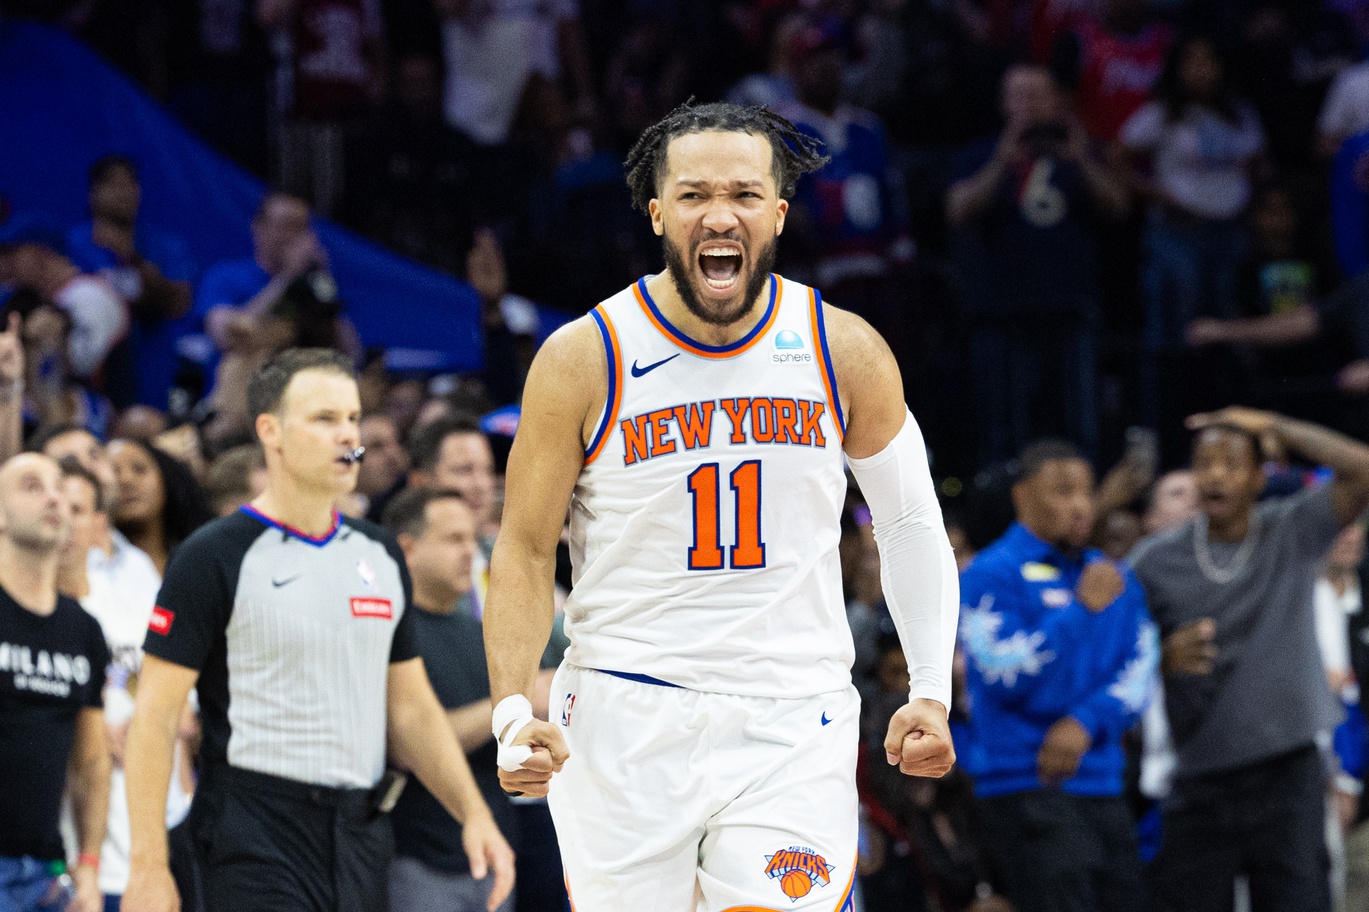 Jalen Brunson and the Knicks are unanimous favorites against the Pacers.